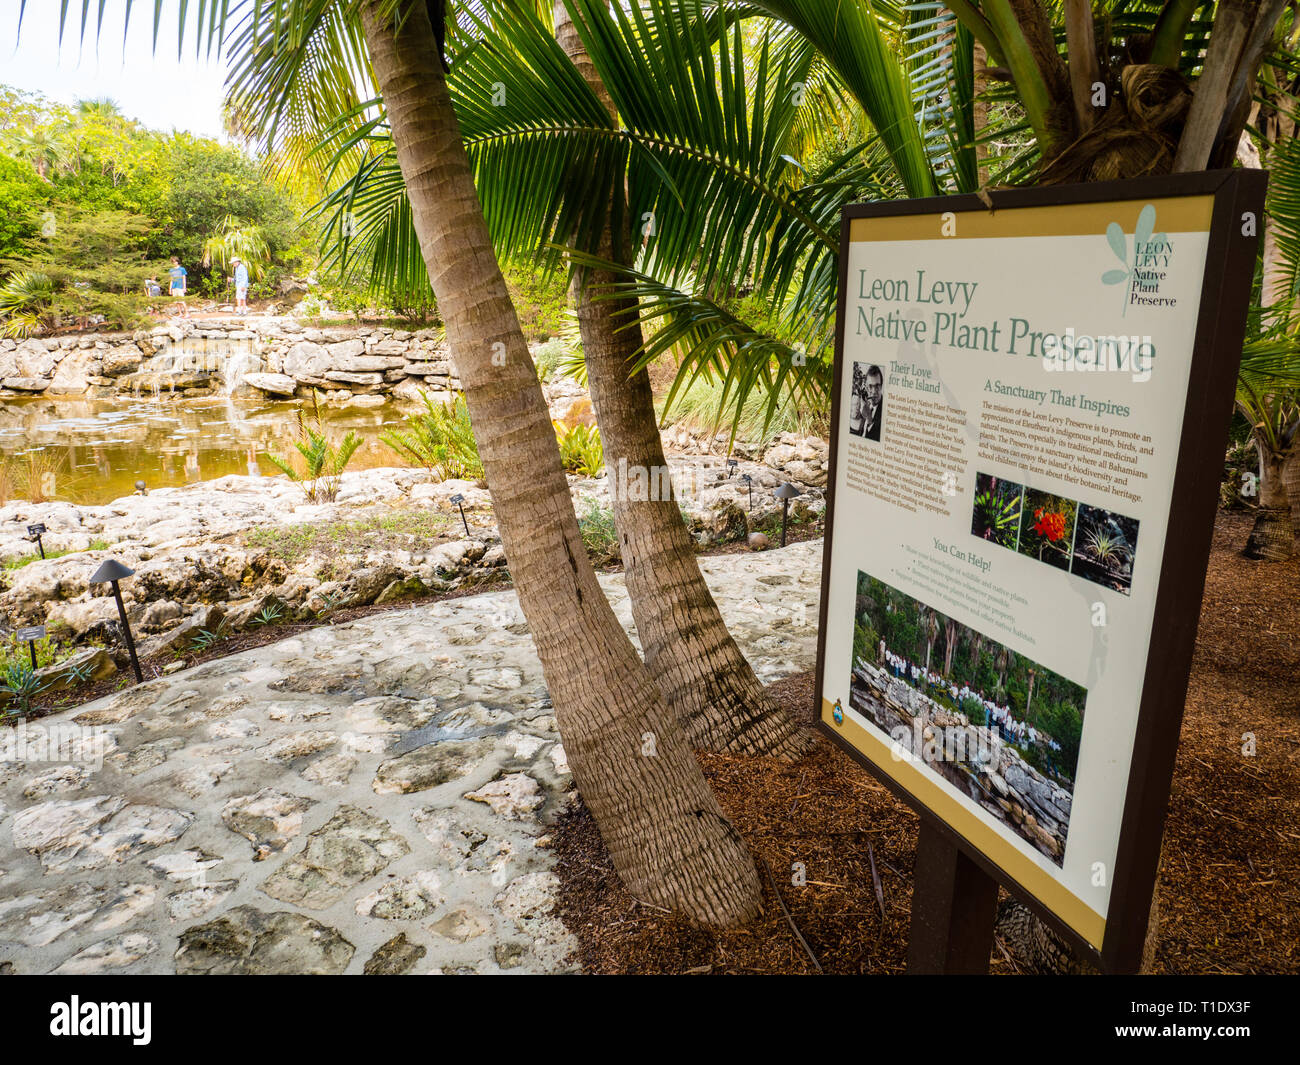 Information Sign at the Entrance to, Leon Levy Native Plant Preserve, Eleuthera, The Bahamas, The Caribbean. Stock Photo